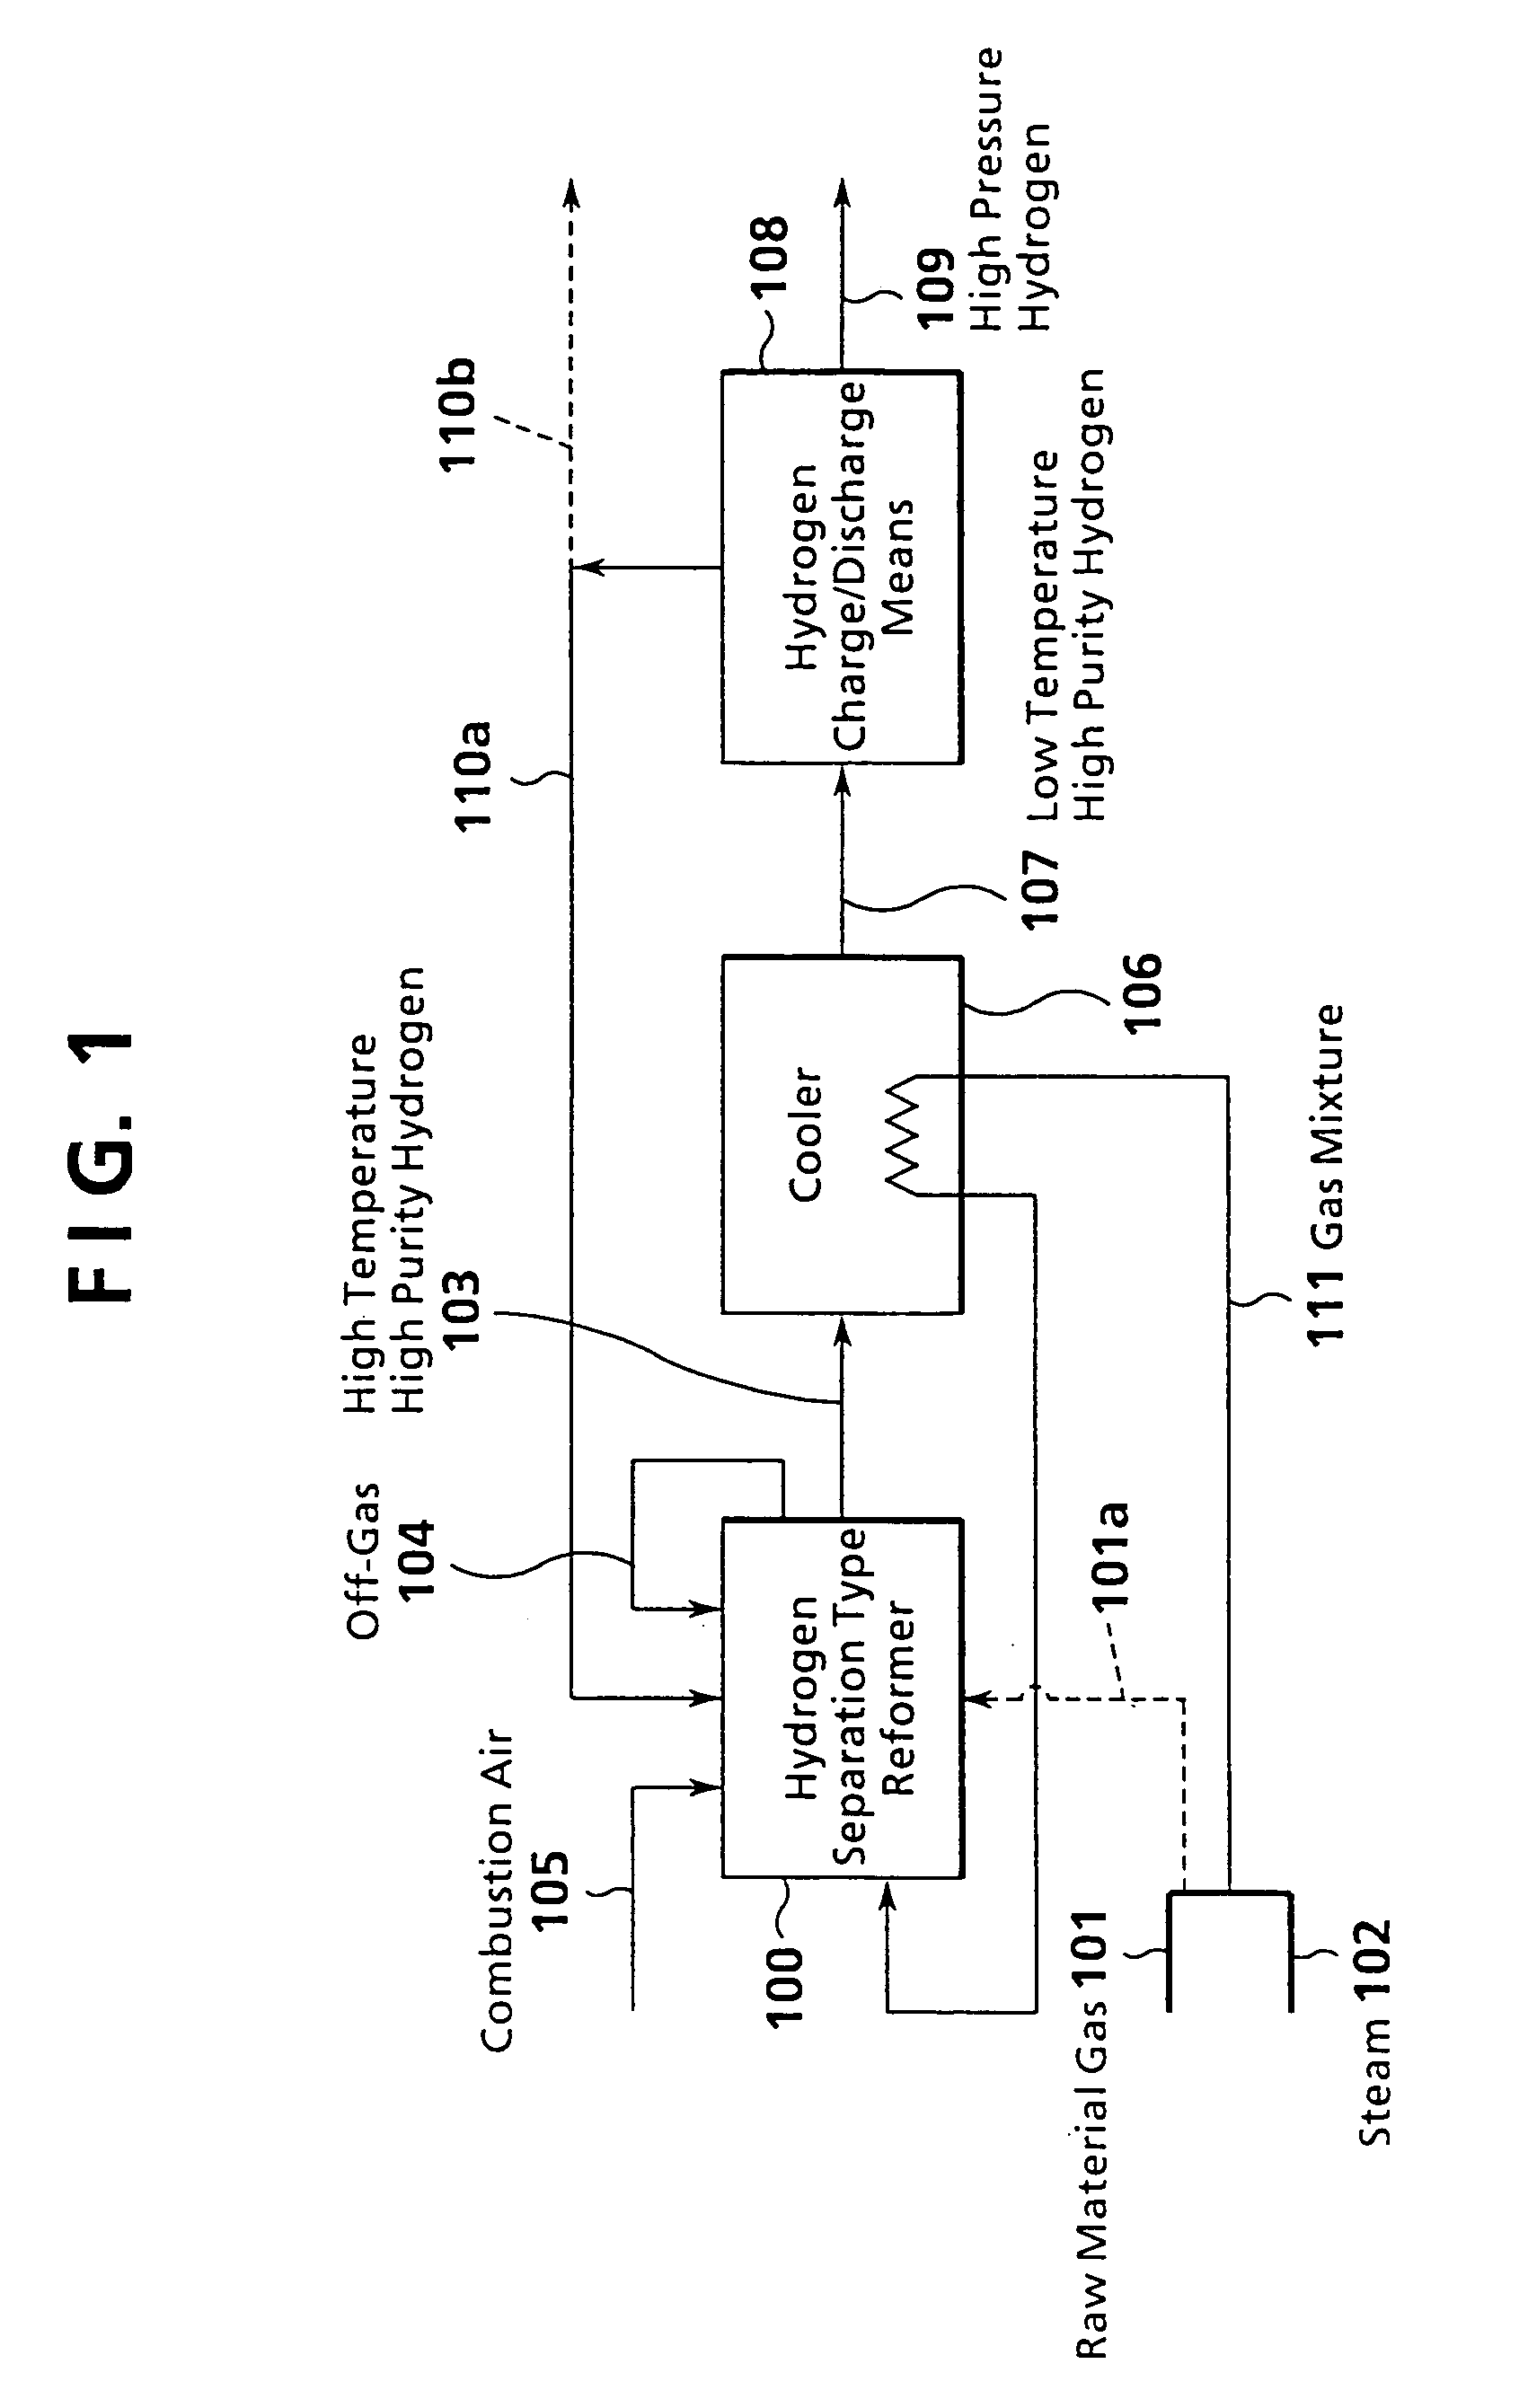 Apparatus for producing hydrogen